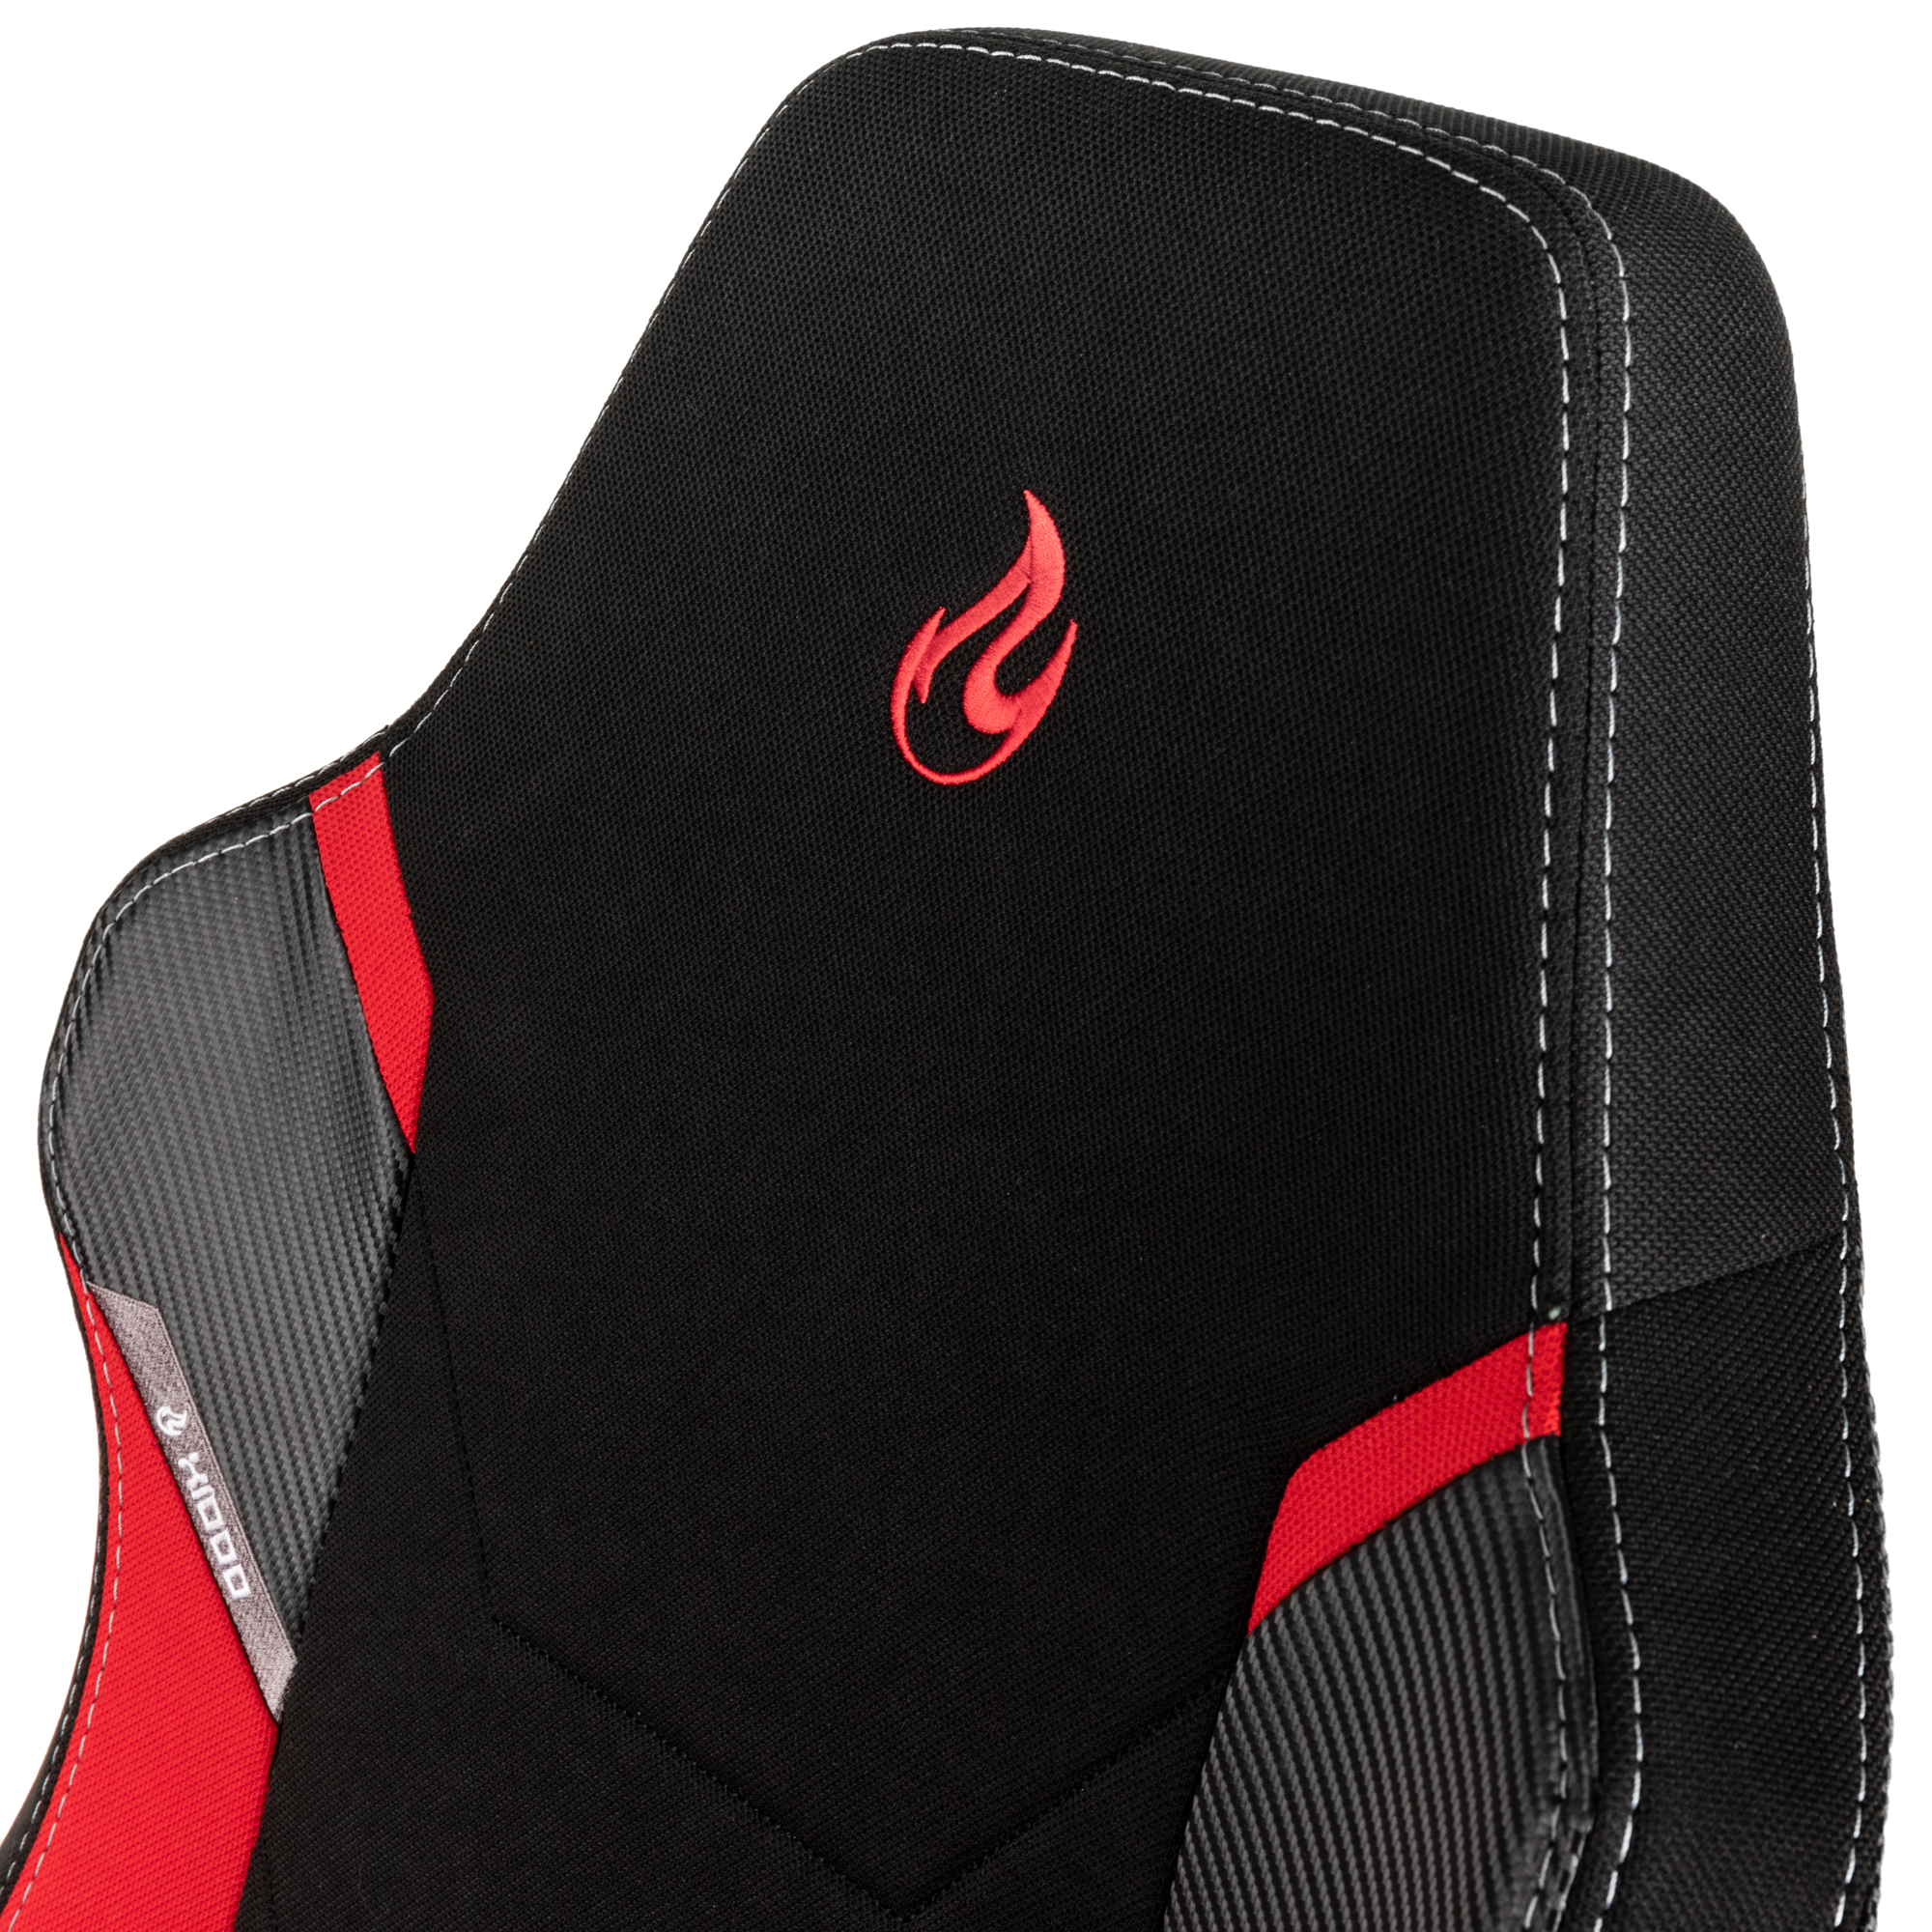 X1000 Gaming Chair Black/Red